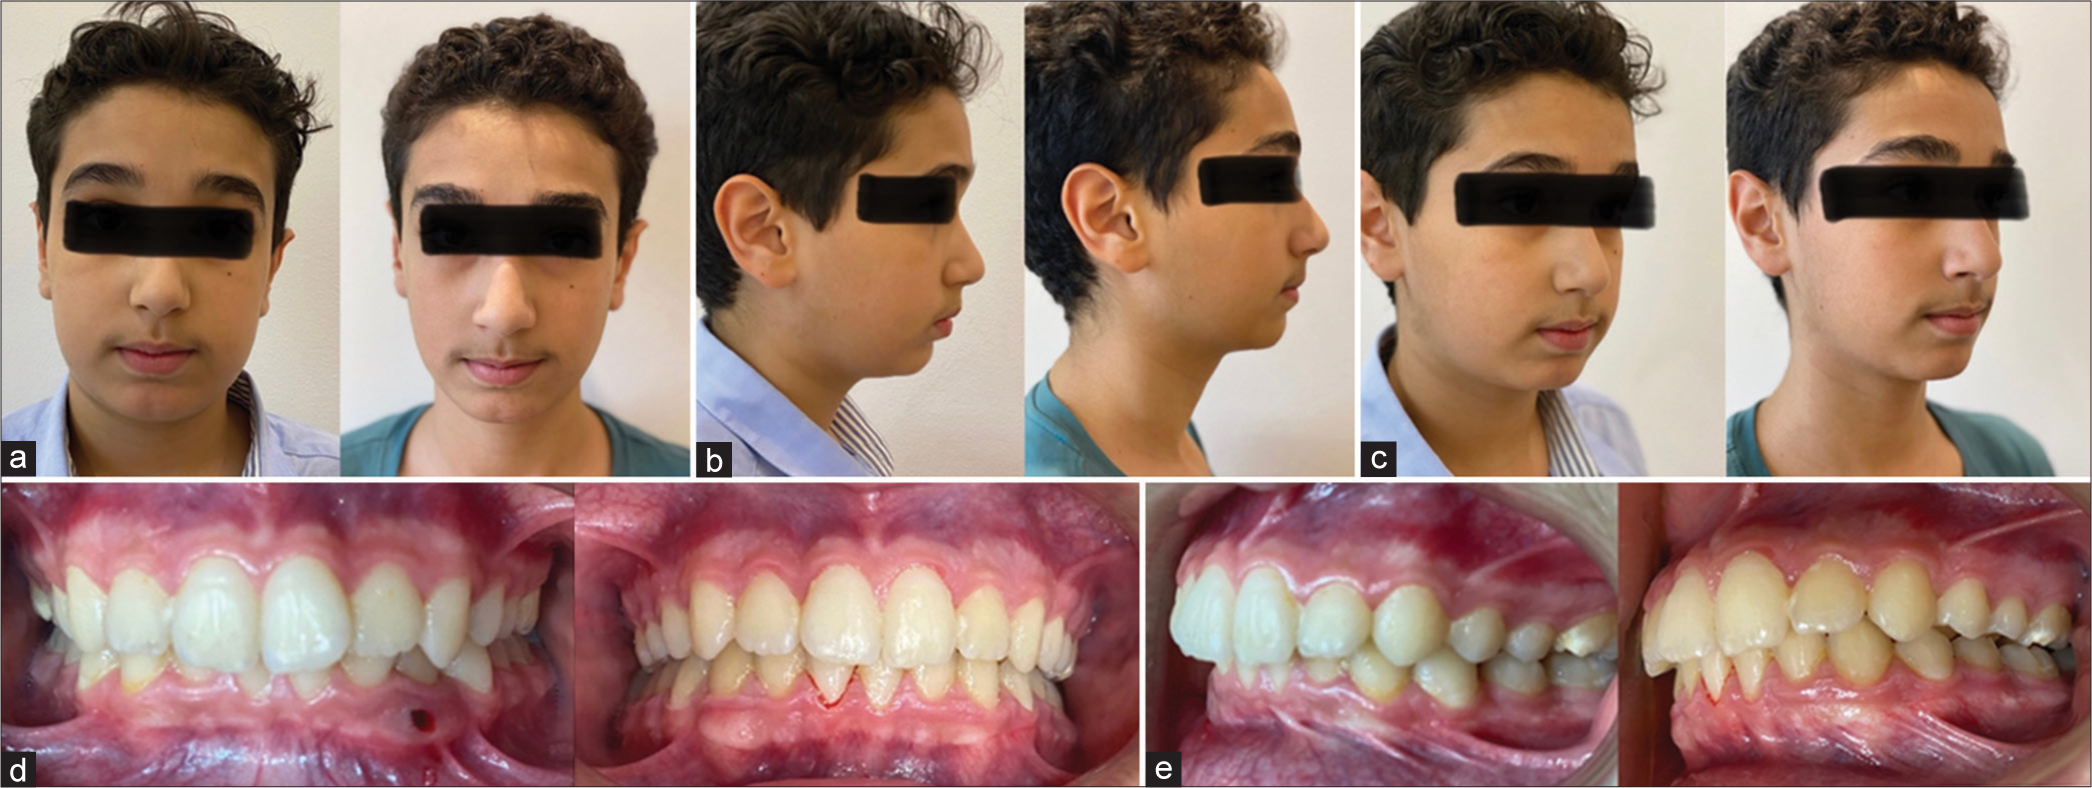 Pre- and post-treatment photographs: (a) frontal view, (b) profile view, (c) oblique view, (d) intraoral view, and (e) lateral view of intraoral.